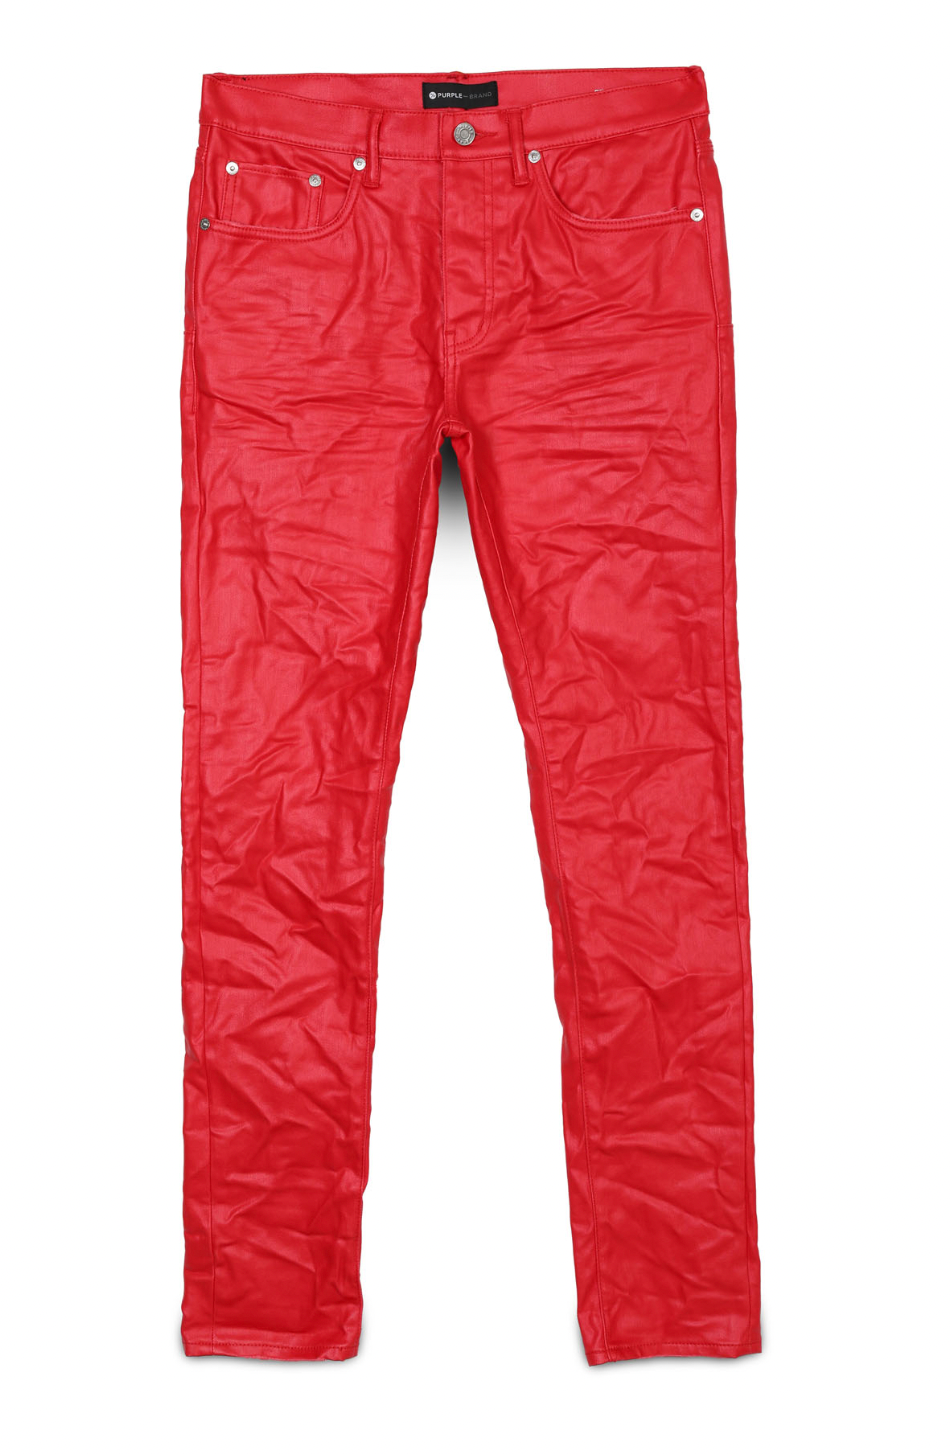 Purple Brand Mens Red Patent Leather Film Jeans